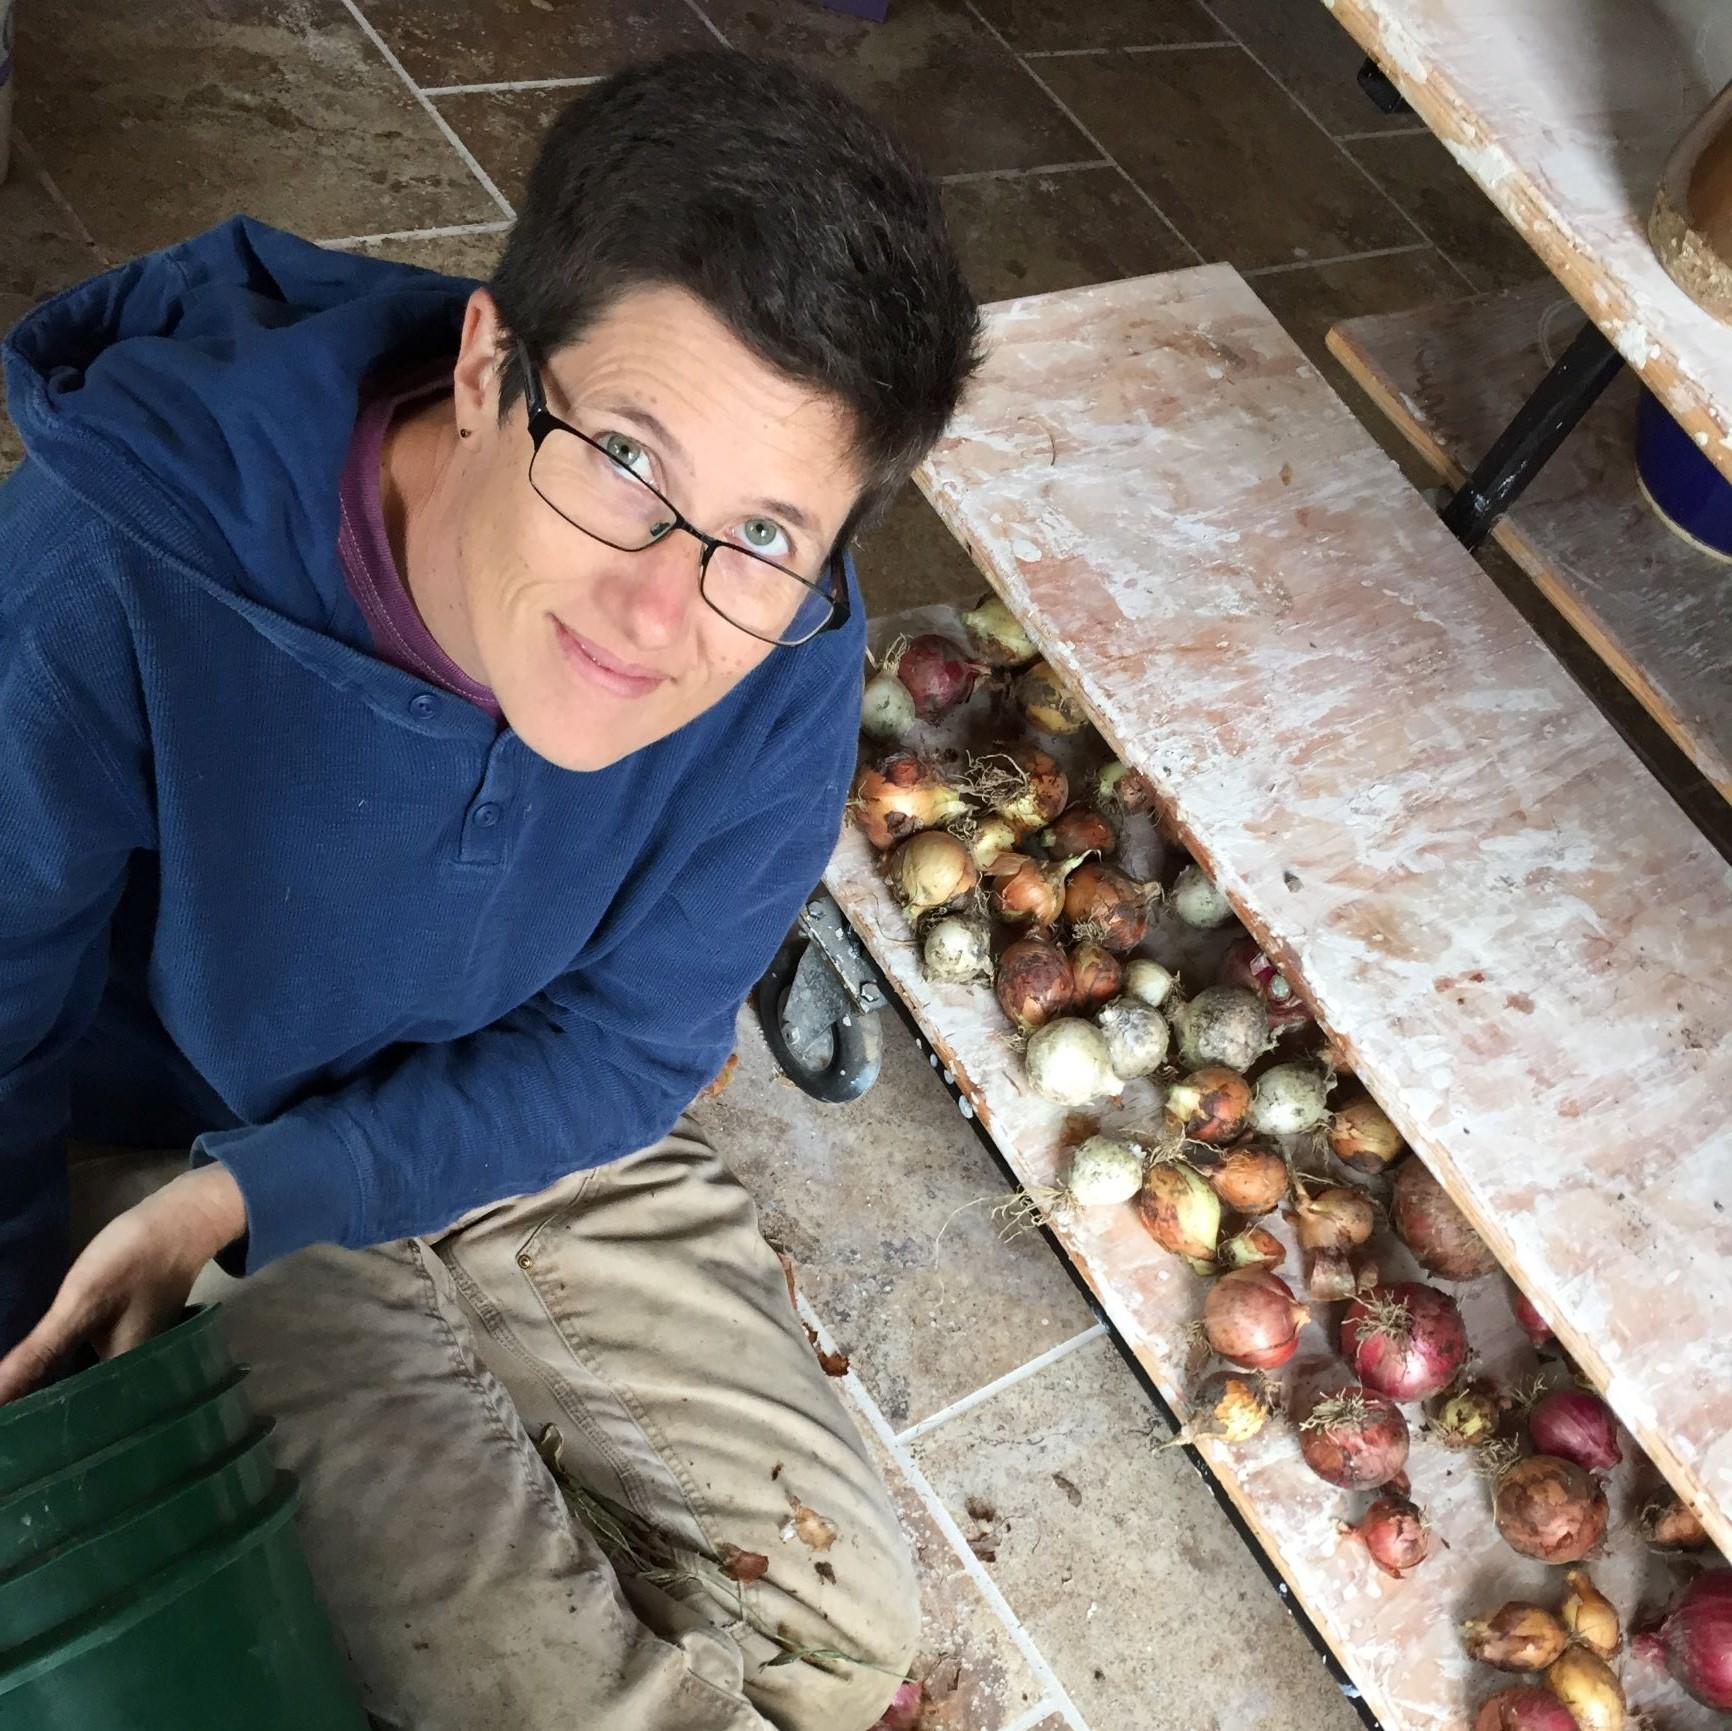 Smiling woman with glasses posing with onion harvest.